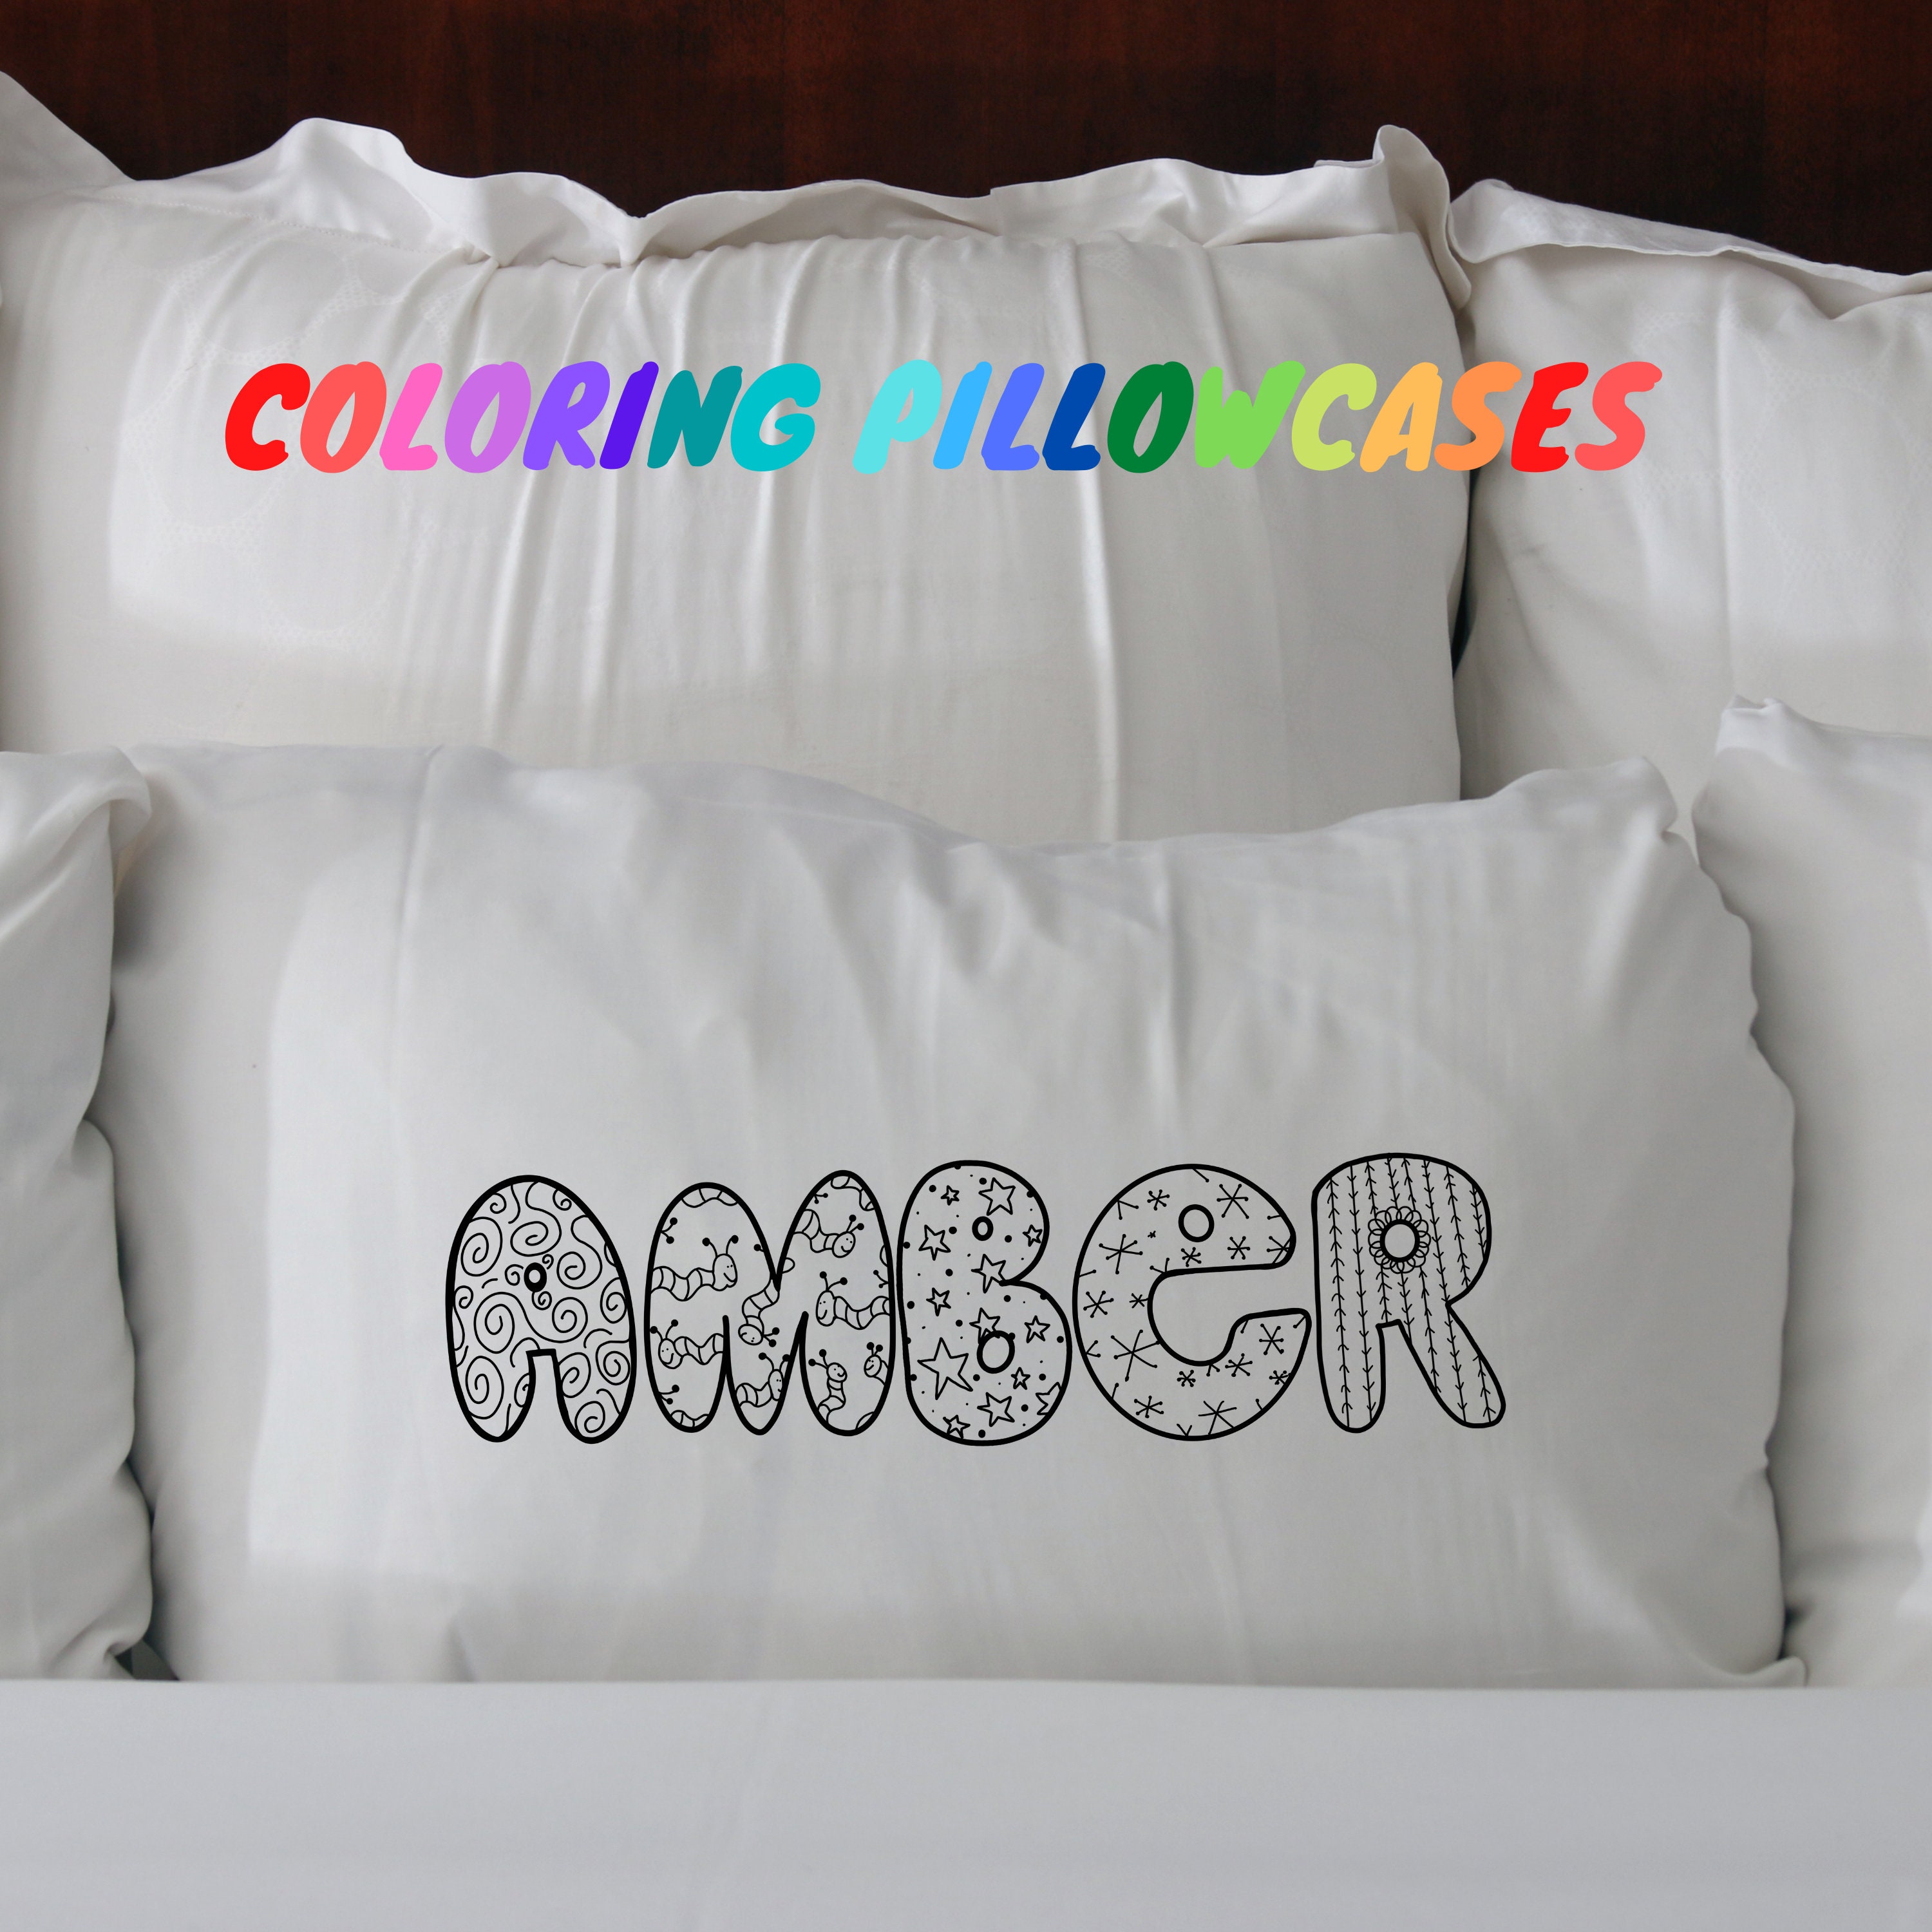 Pillow Cover-Sublimation Blank 10 x 10 White pillow Covers (Worry Pillows)